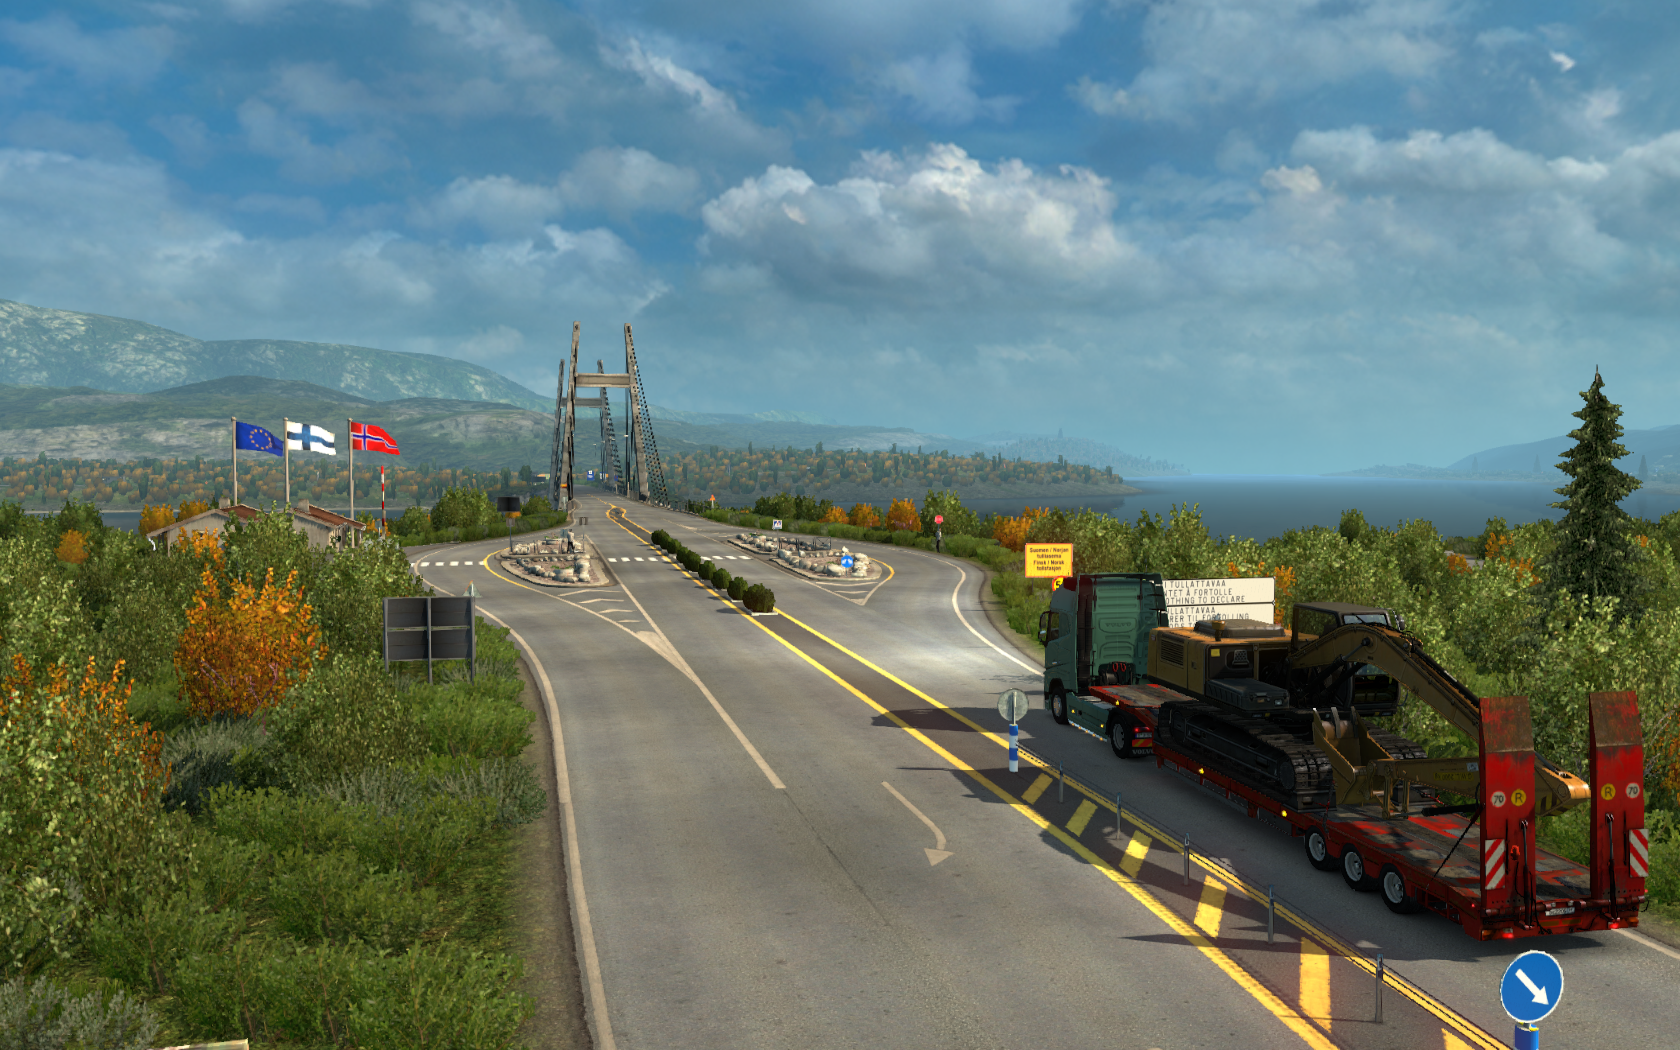 ets2_00171.png